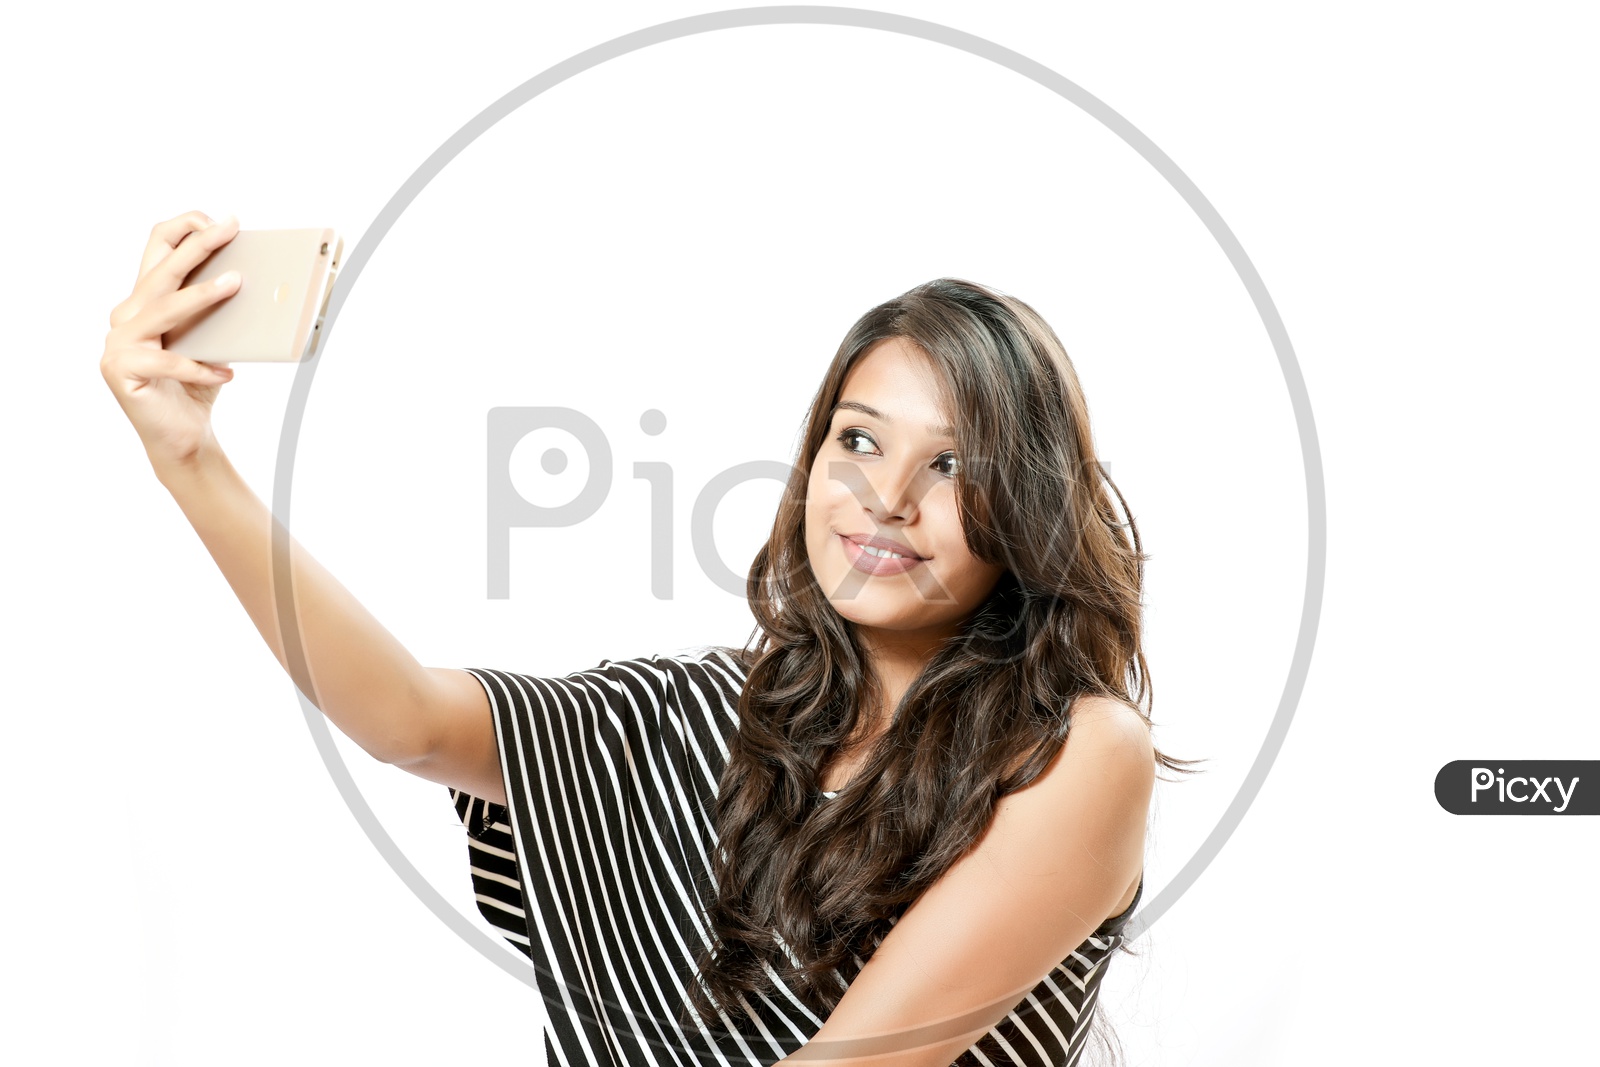 Indian Young Girl Taking a Selfie With a Smiling Face on an Isolated White Background